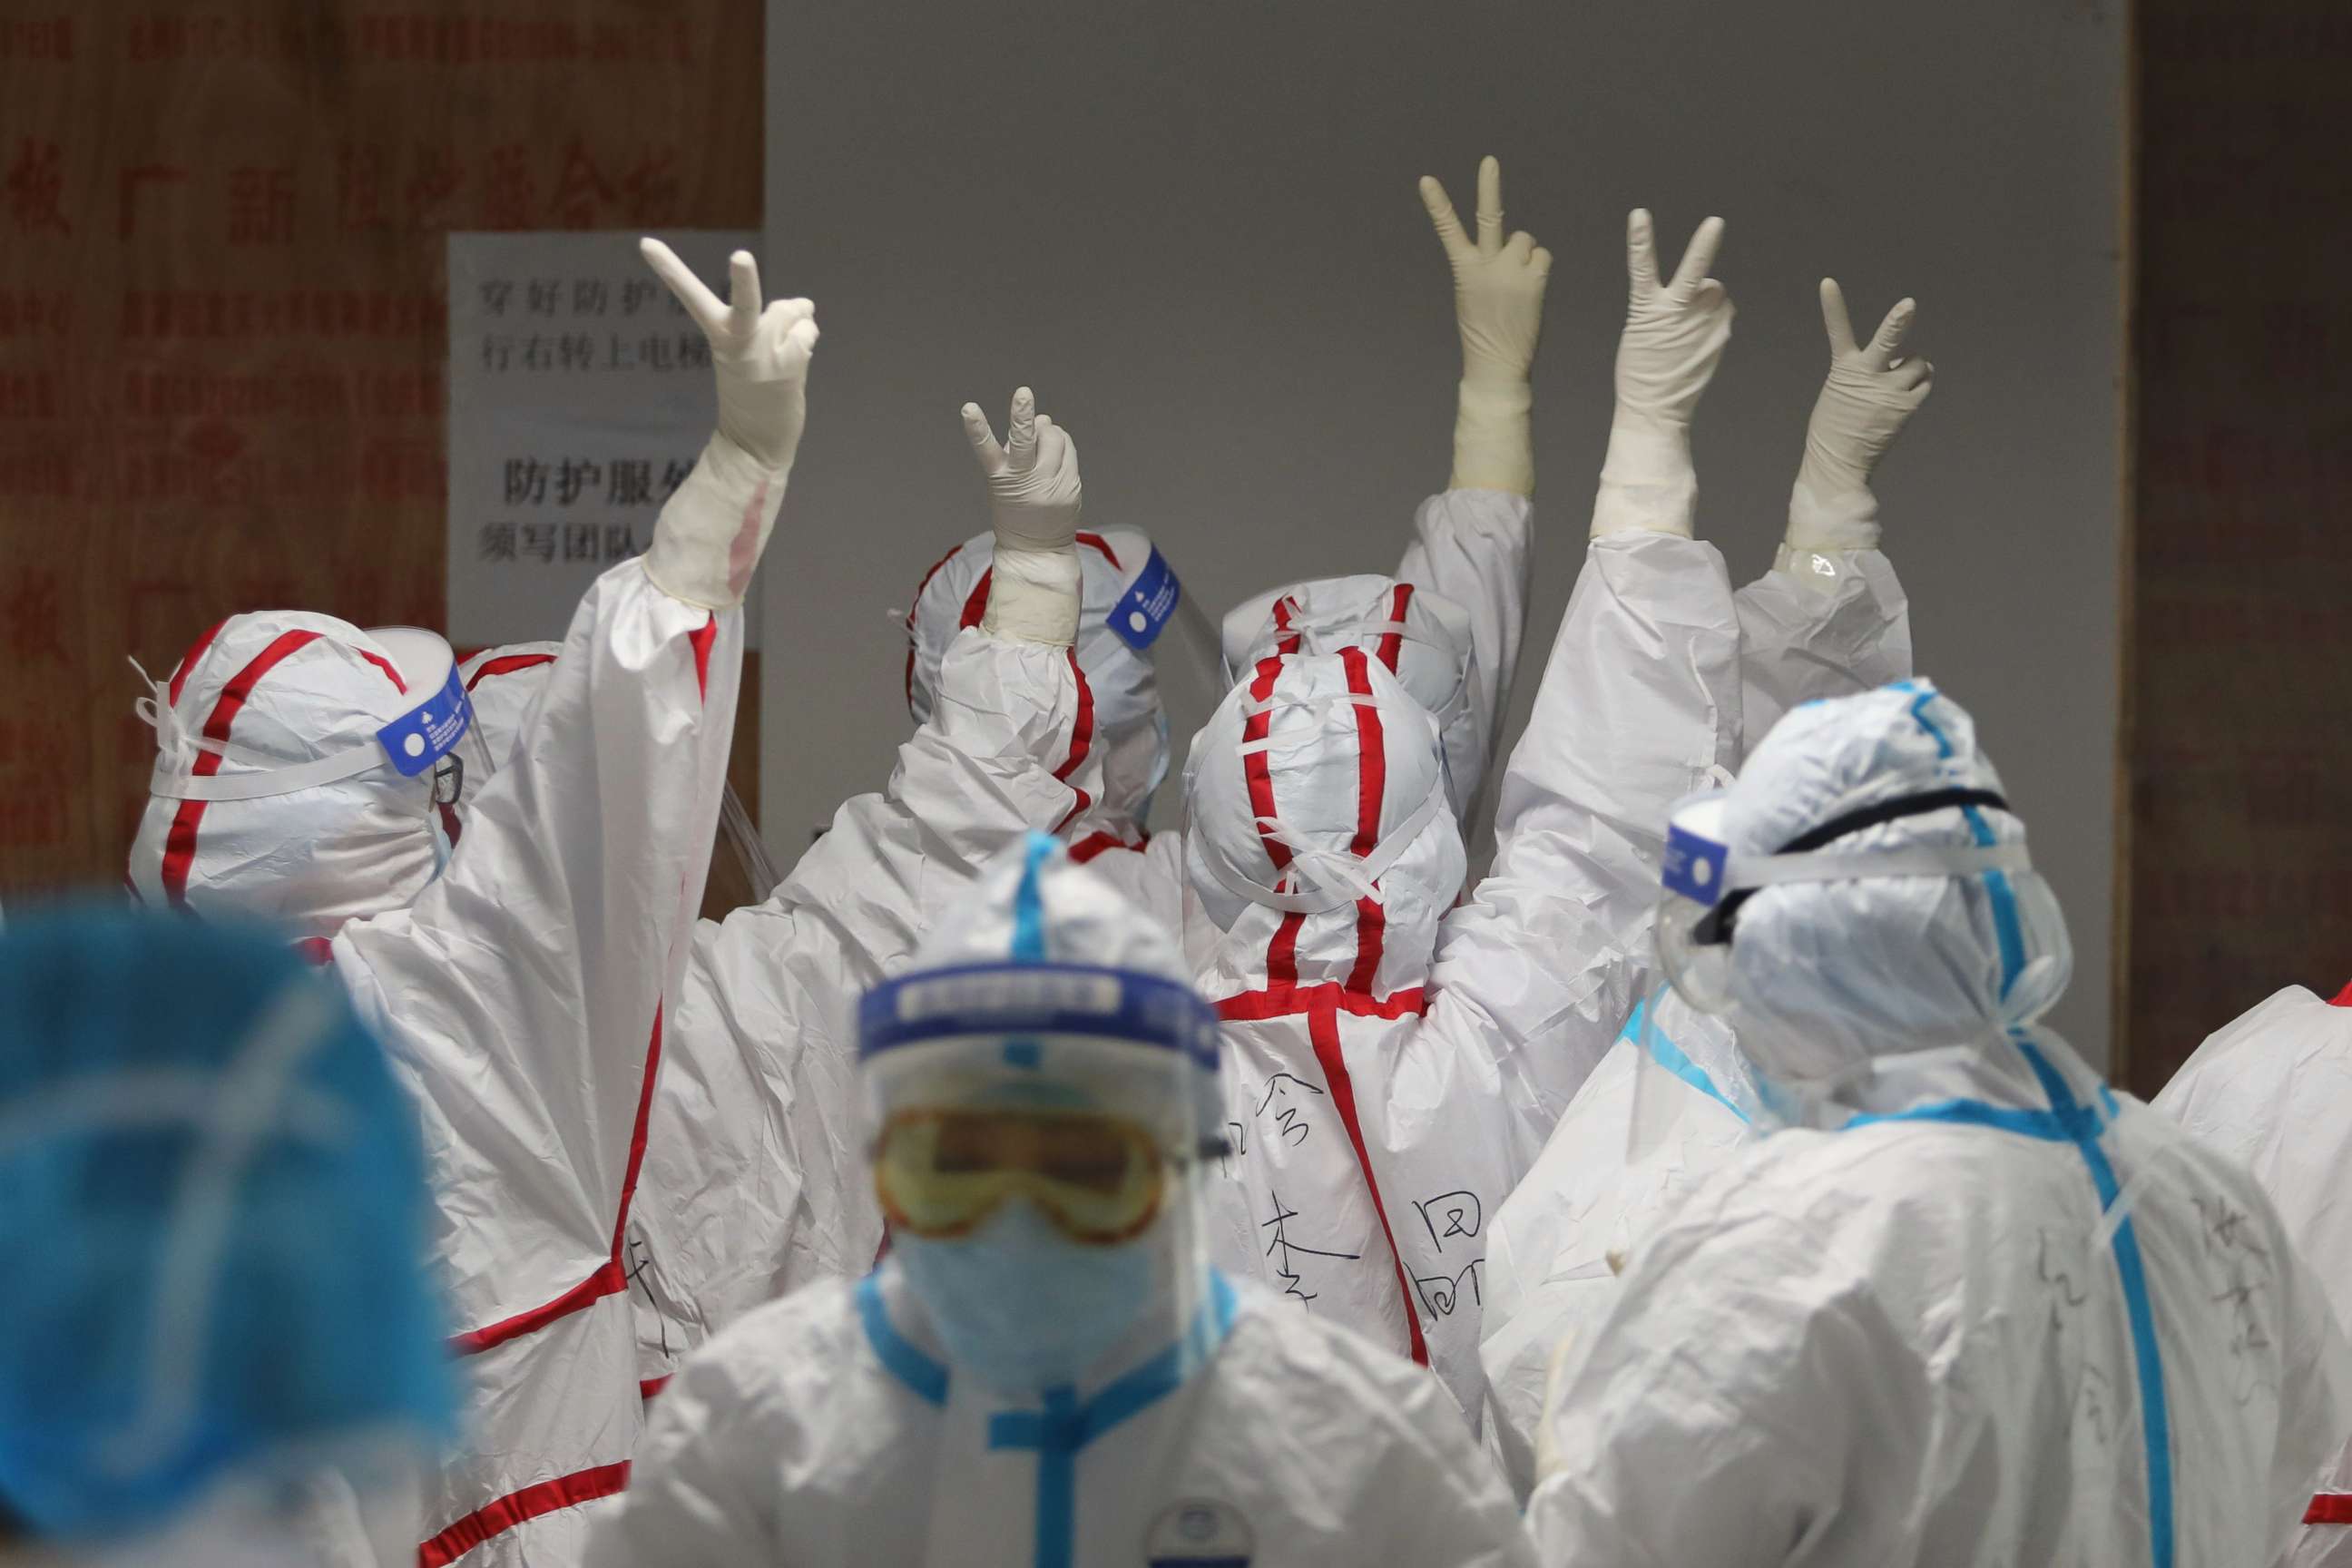 PHOTO: Medical staff cheer themselves up before going into an ICU ward for patients infected with the novel coronavirus at the Red Cross Hospital in Wuhan in China's central Hubei province on March 16, 2020.